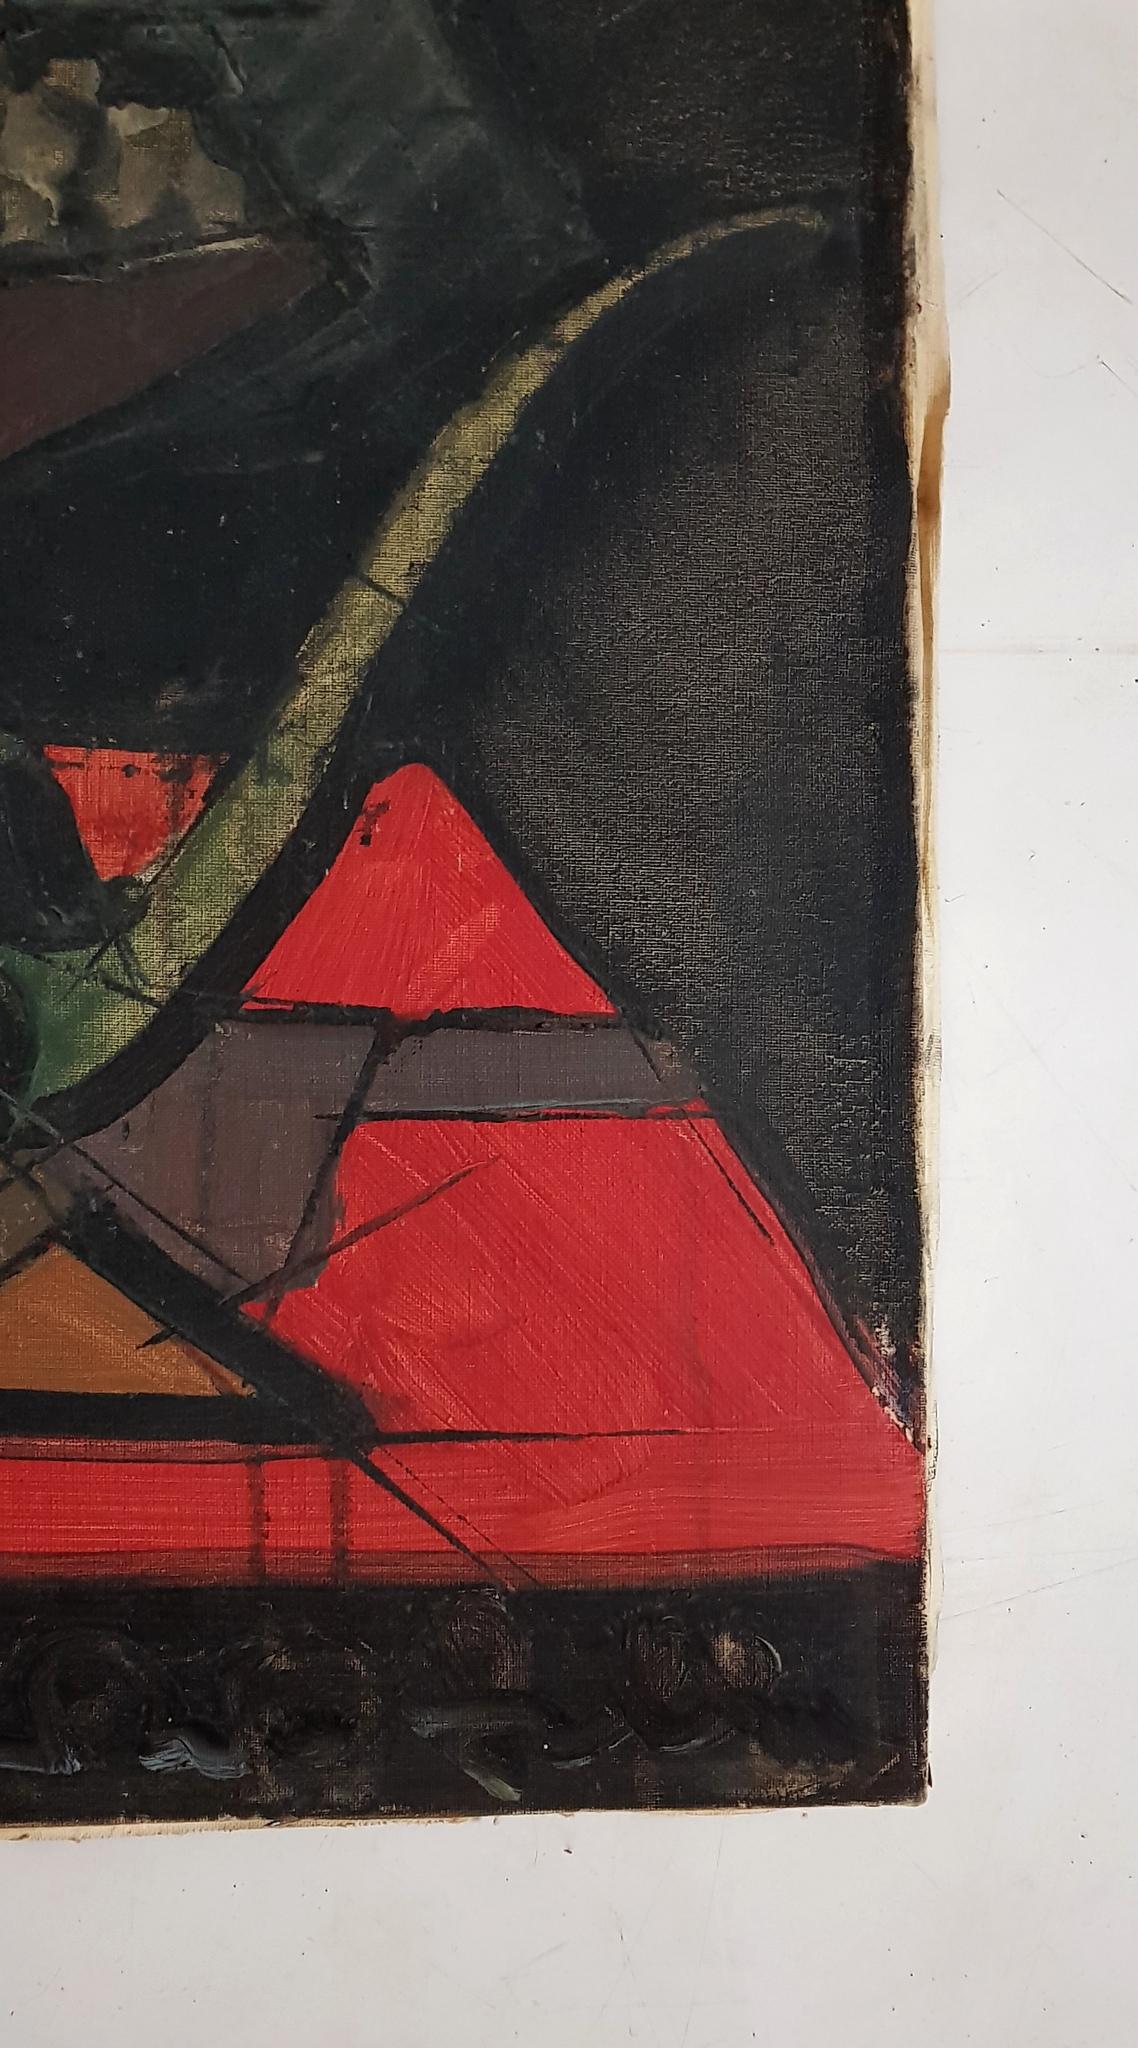 Midcentury oil painting on canvas reminiscent of the artist Bernard Buffet. In good condition without outer frame. On the back there is a dedication and date. Artist unknown.